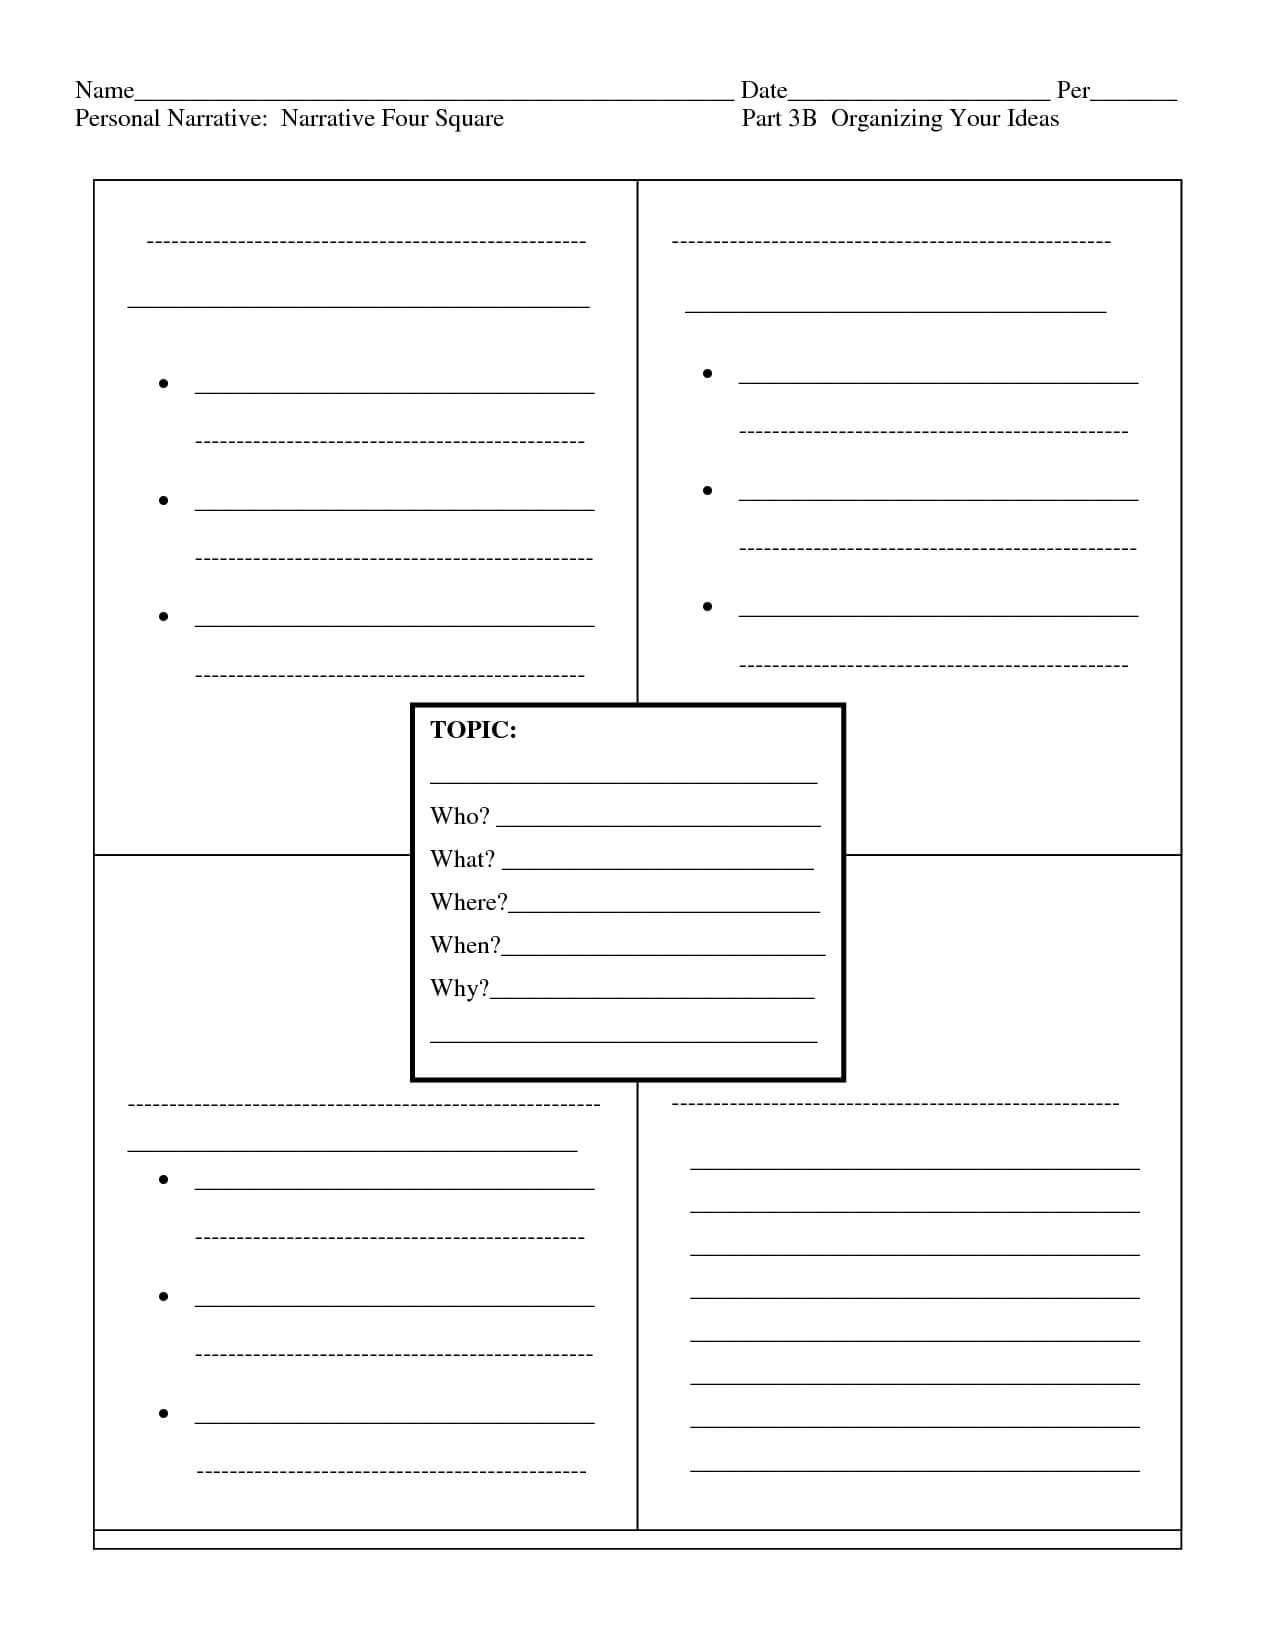 Pindevelopmental Coordination Disorder: One Step Forward Intended For Blank Four Square Writing Template